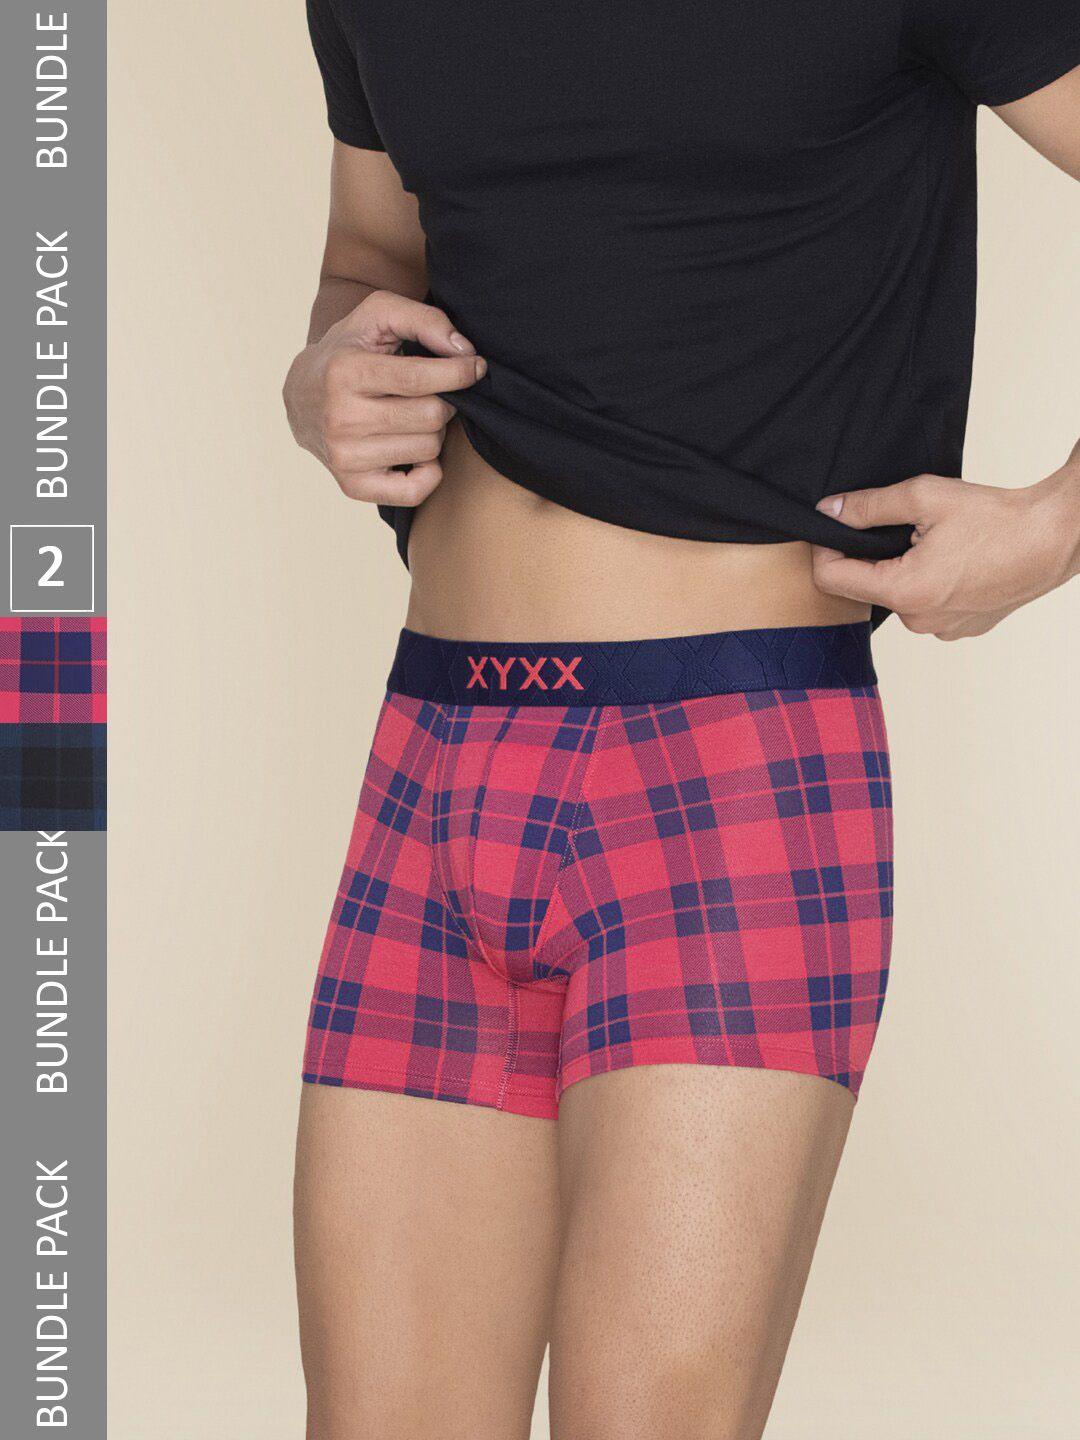 xyxx men pack of 2 checked breathable trunks xytrnk2pckn709